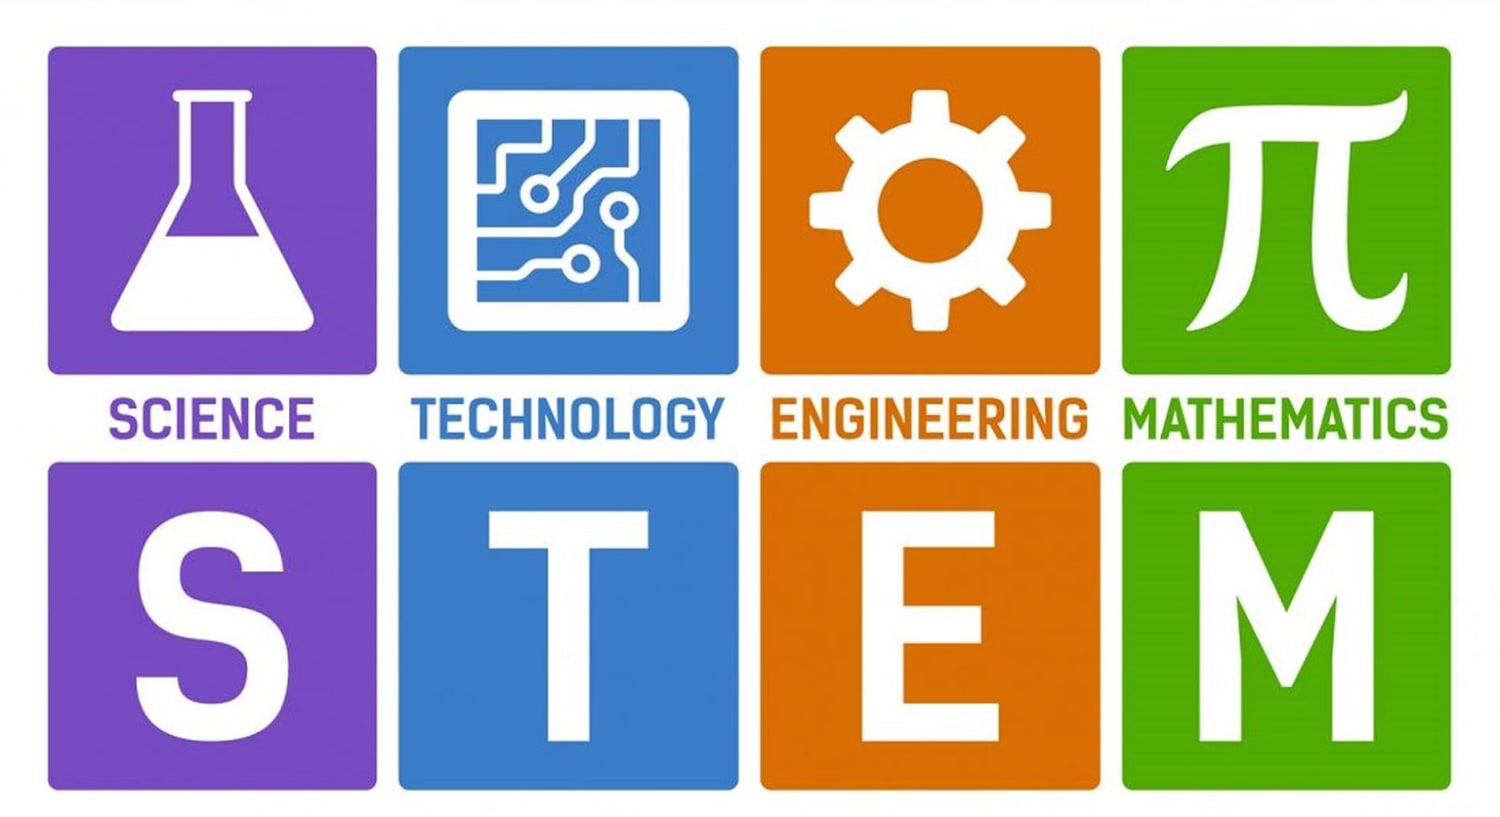 Taking STEM learning to the next level of Education